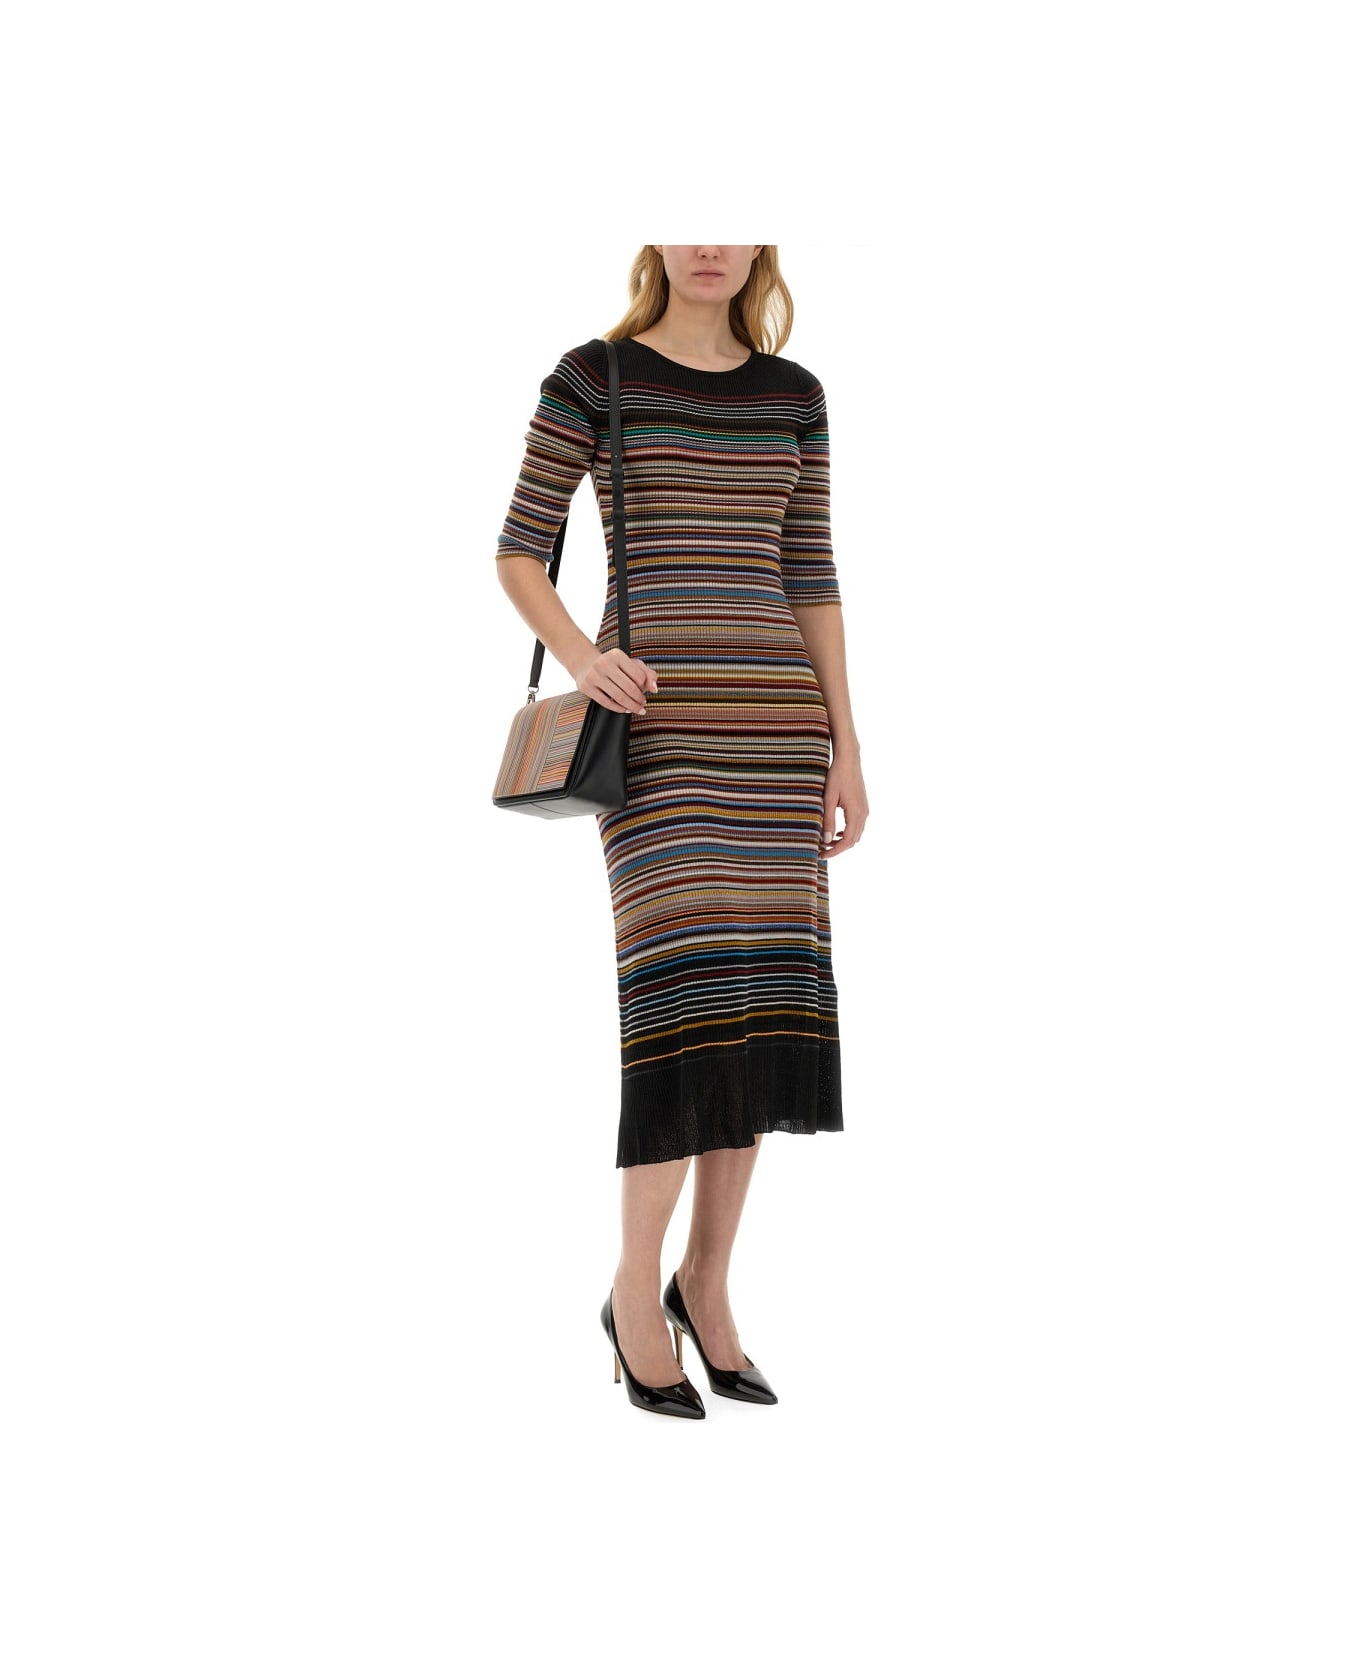 Paul Smith Knitted Dress - MULTICOLOUR